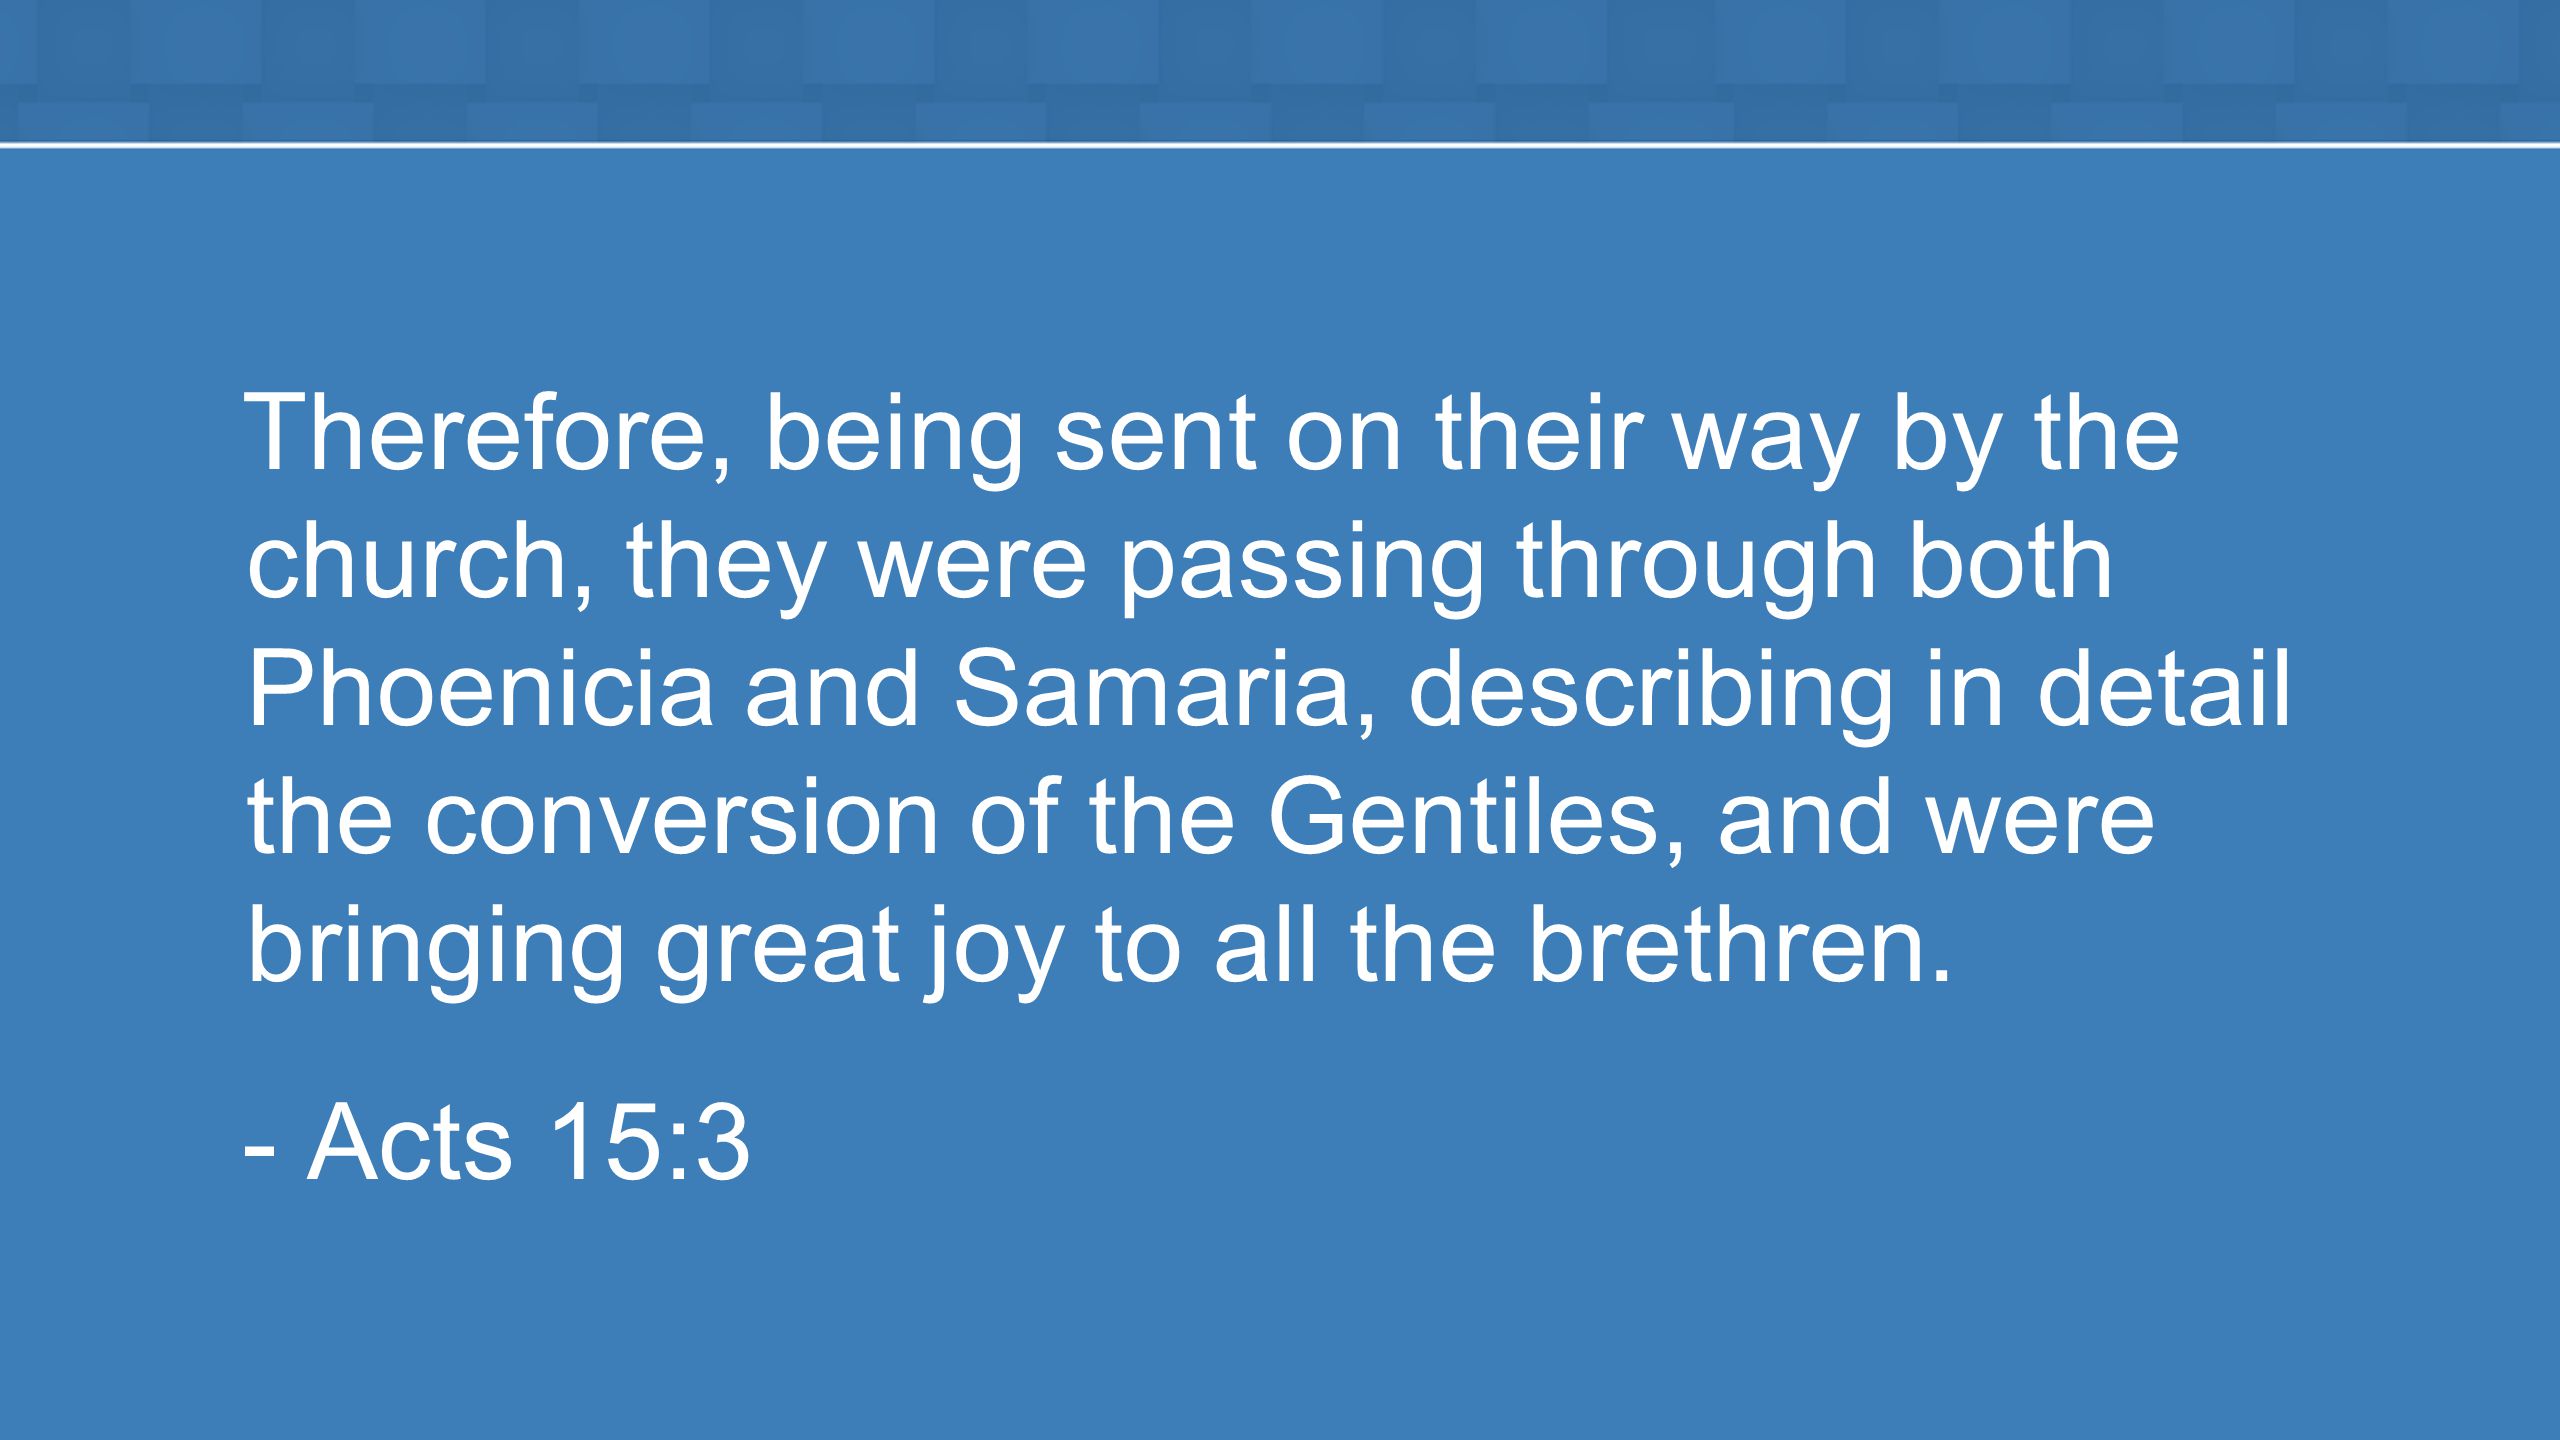 Therefore, being sent on their way by the church, they were passing through both Phoenicia and Samaria, describing in detail the conversion of the Gentiles, and were bringing great joy to all the brethren.